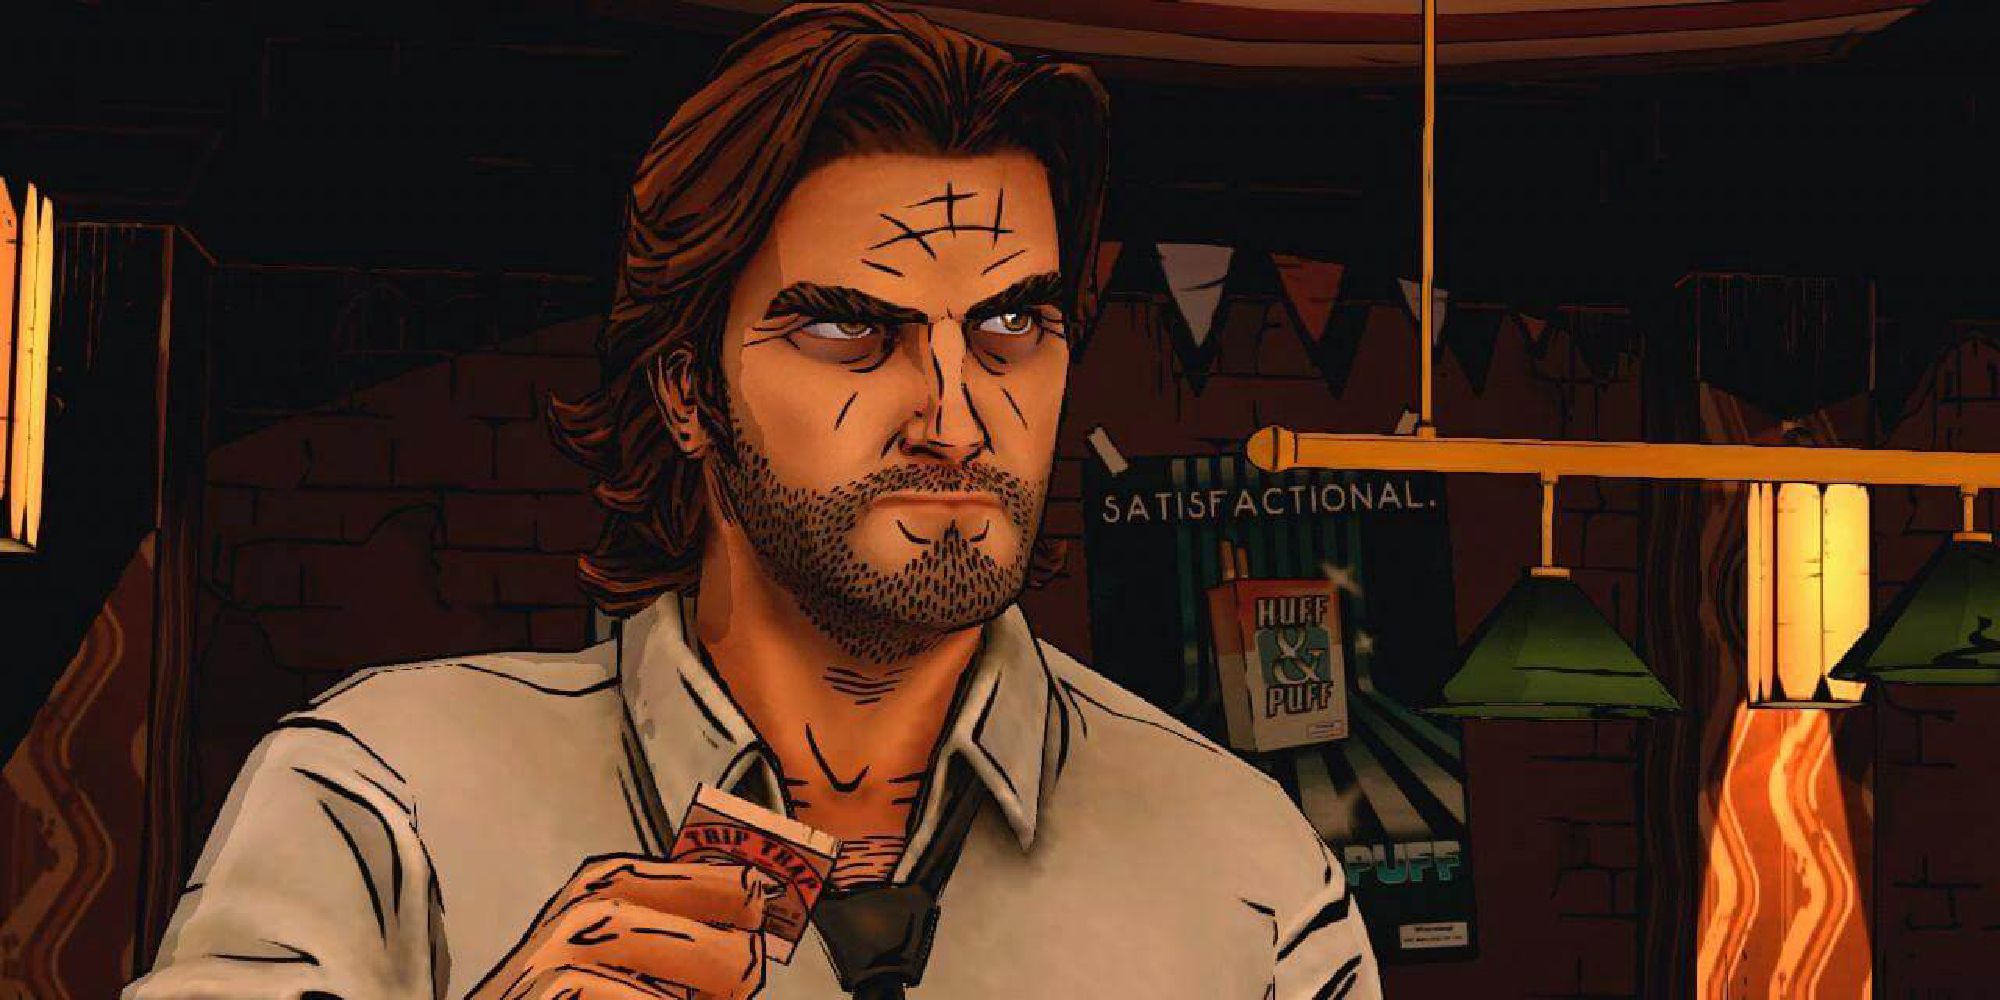 Bigby Wolf stands in a air, fixing a character off screen with a look of suspicion. 